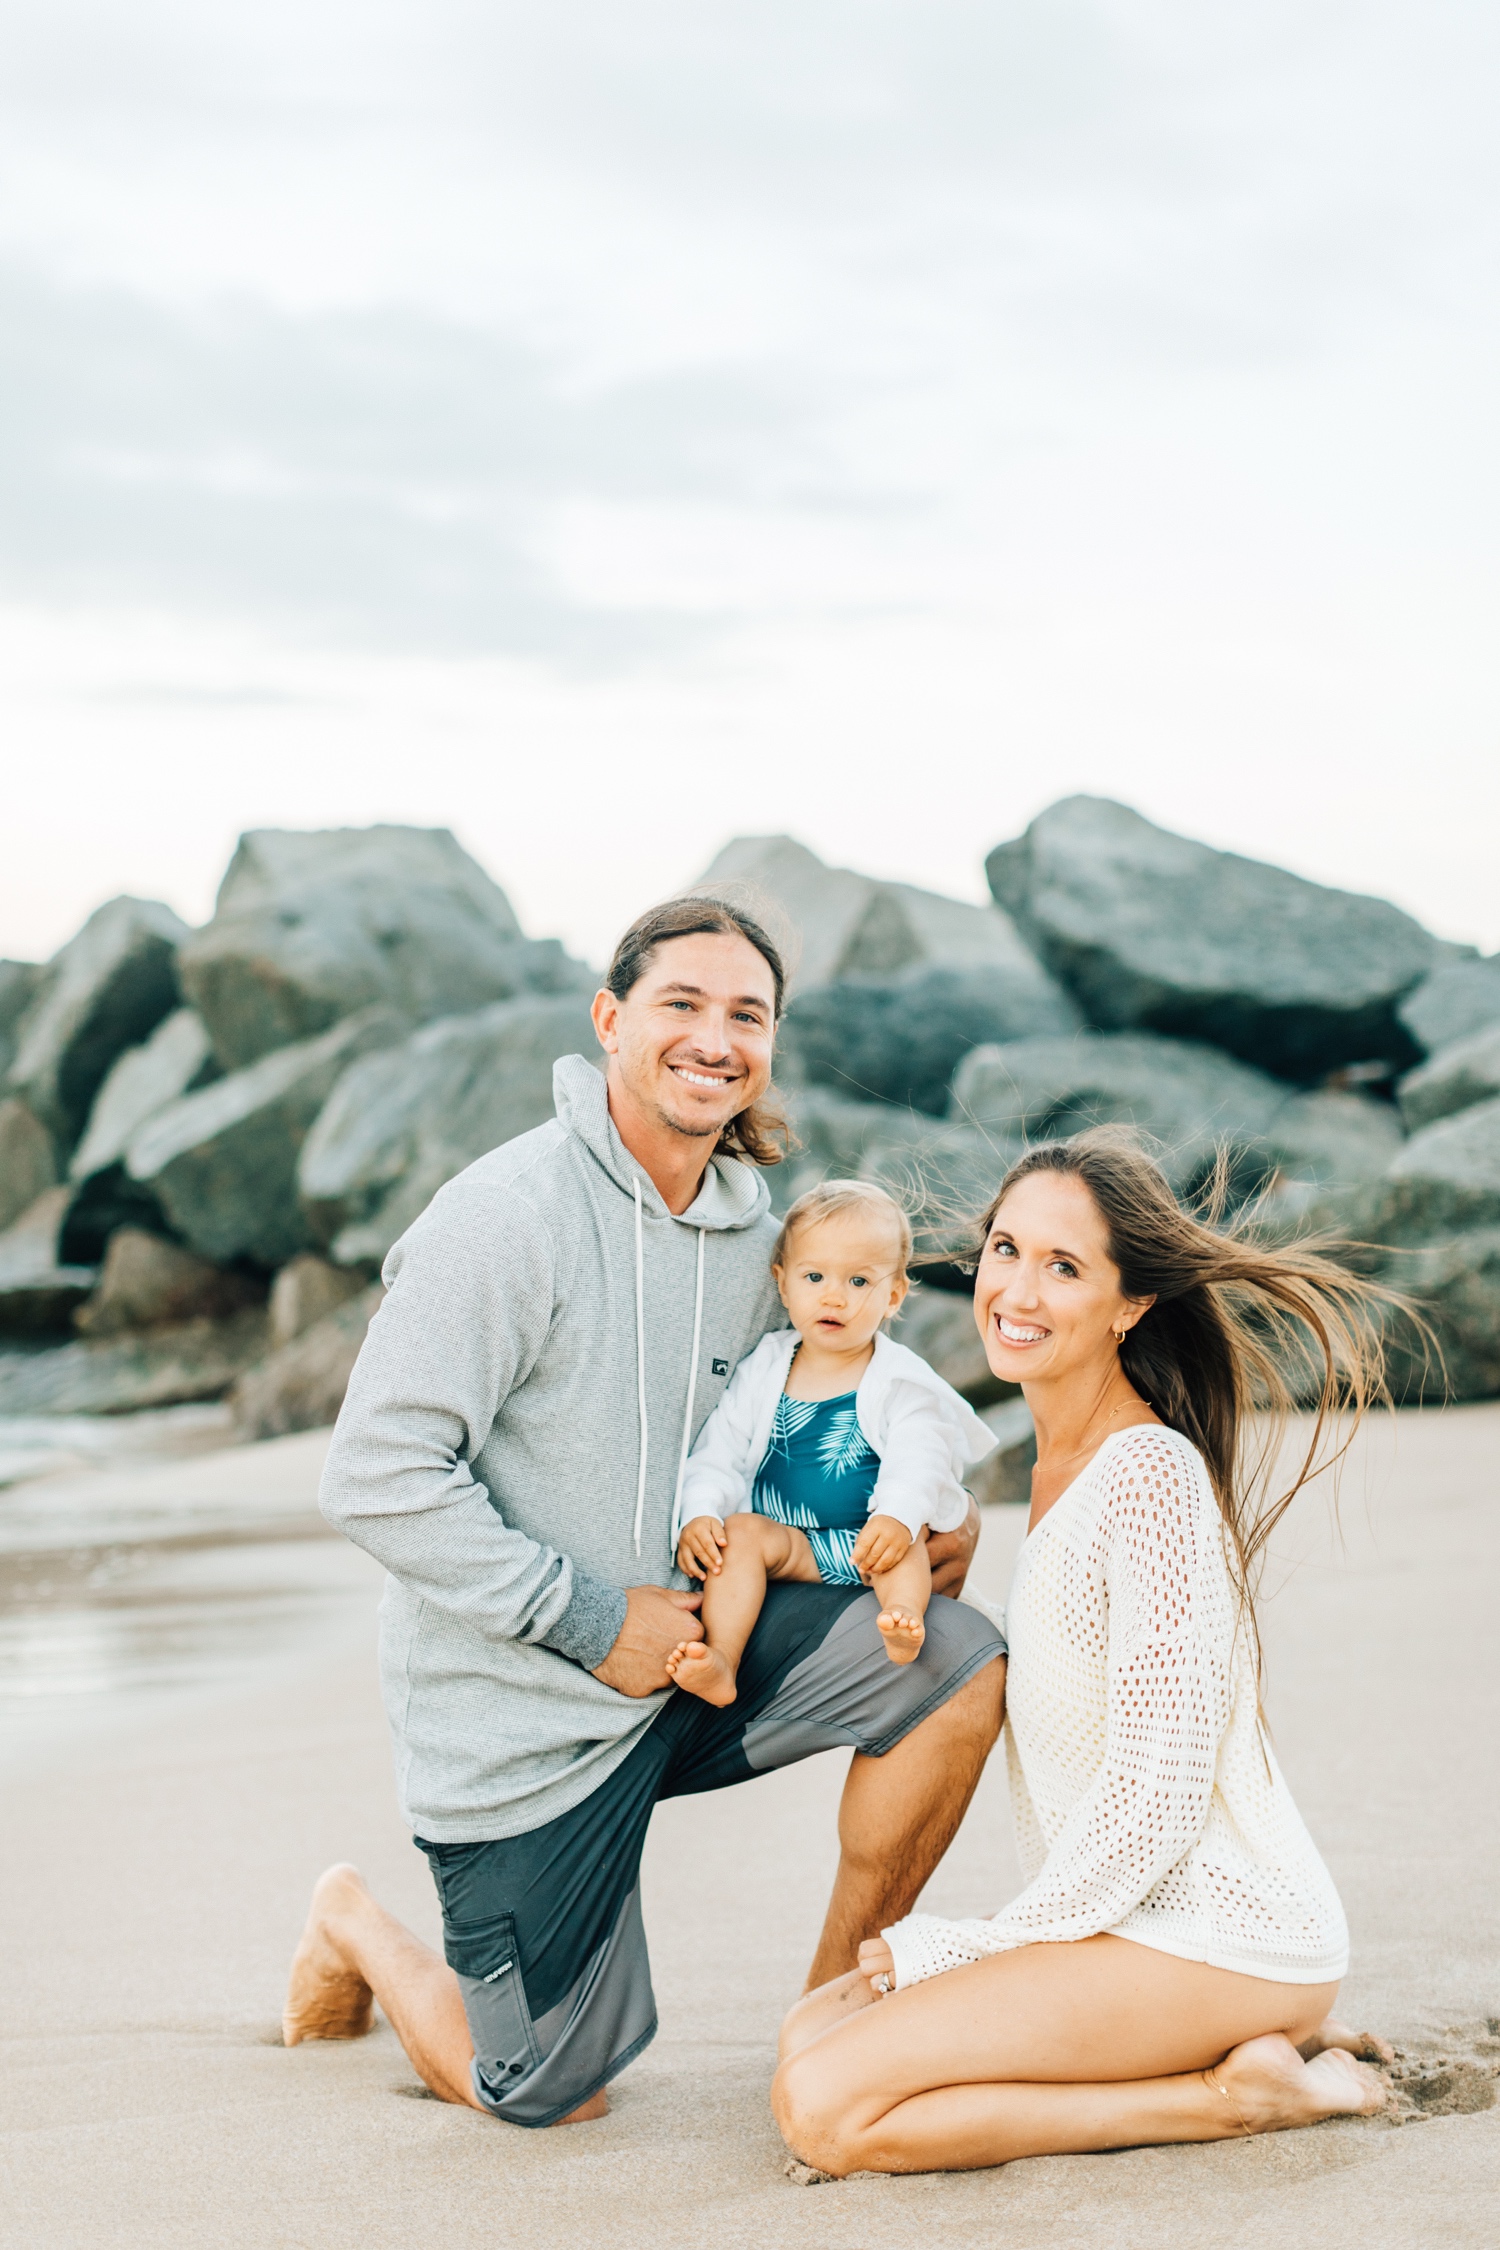 Finding Light Photography Florida Beach Family Session